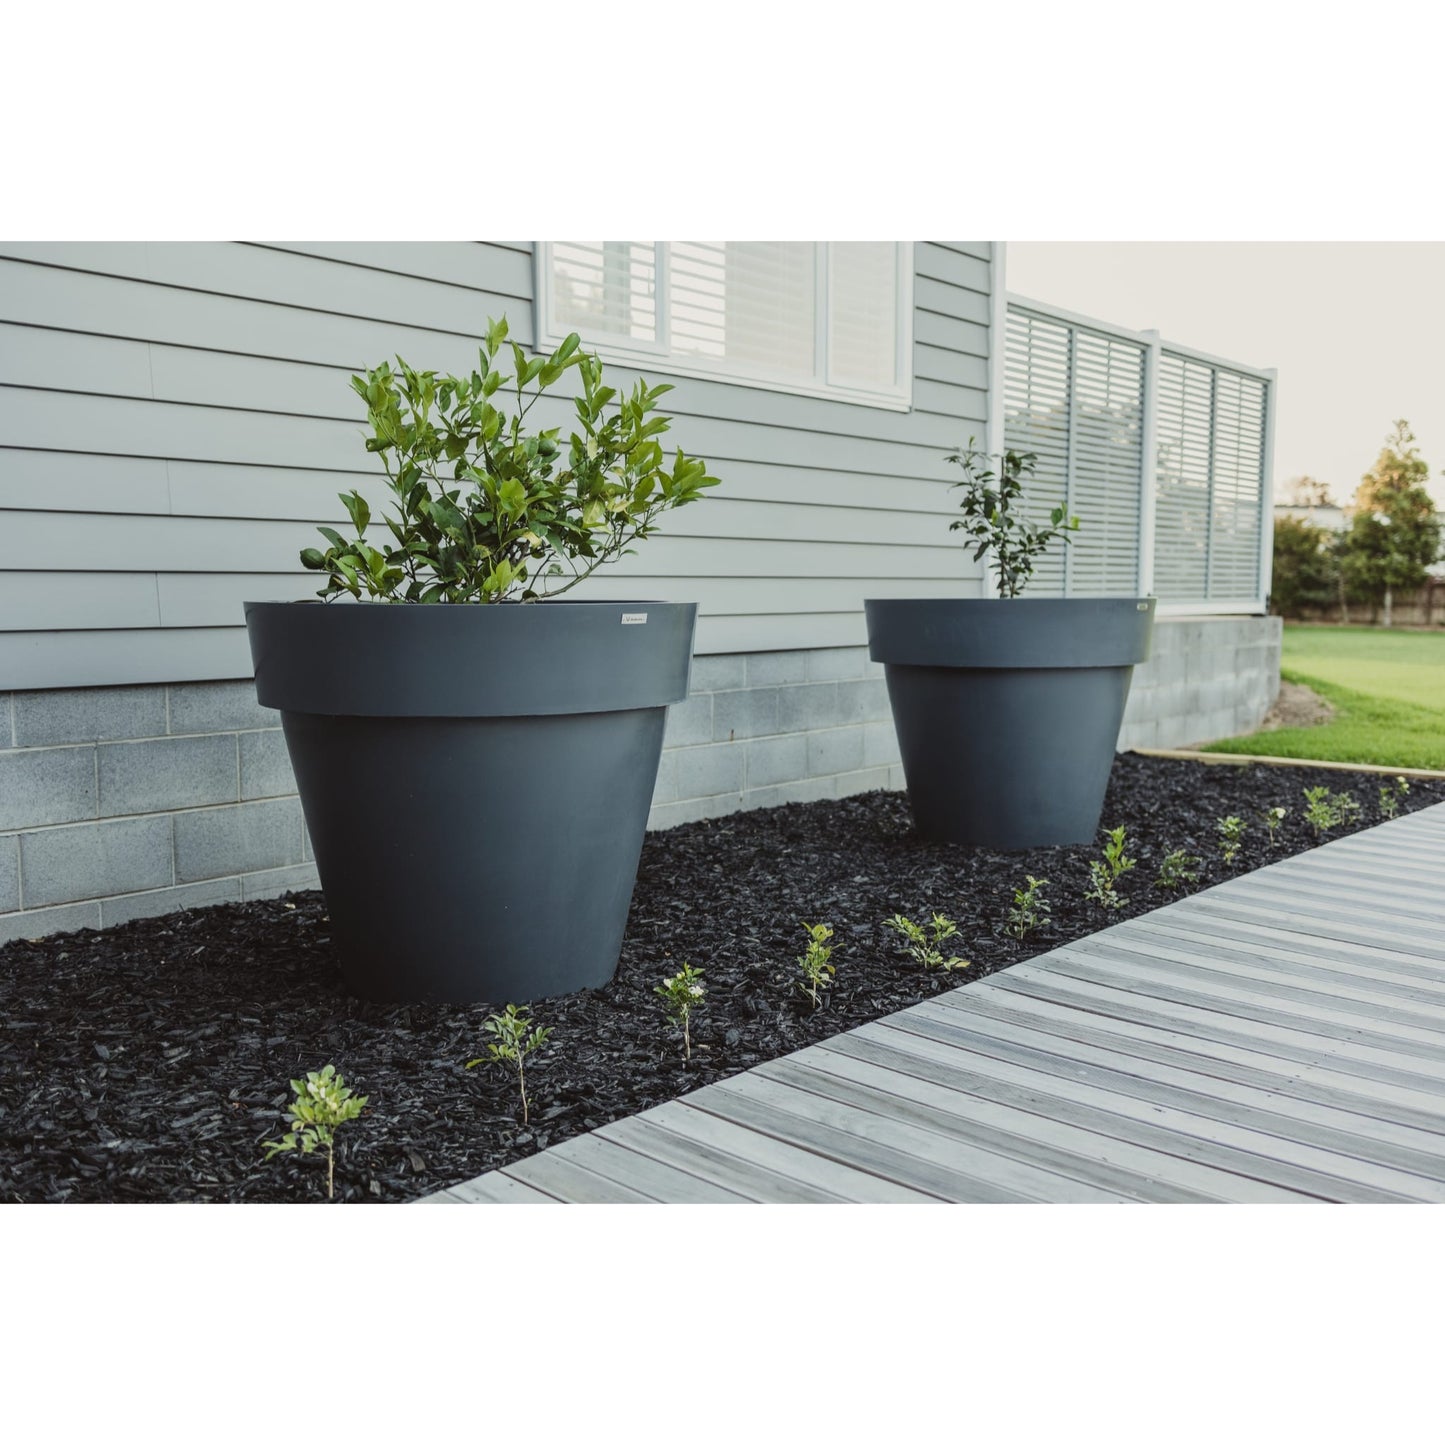 Dark grey planter pots with lemon trees in them. The planters are in a garden in front of a house. 